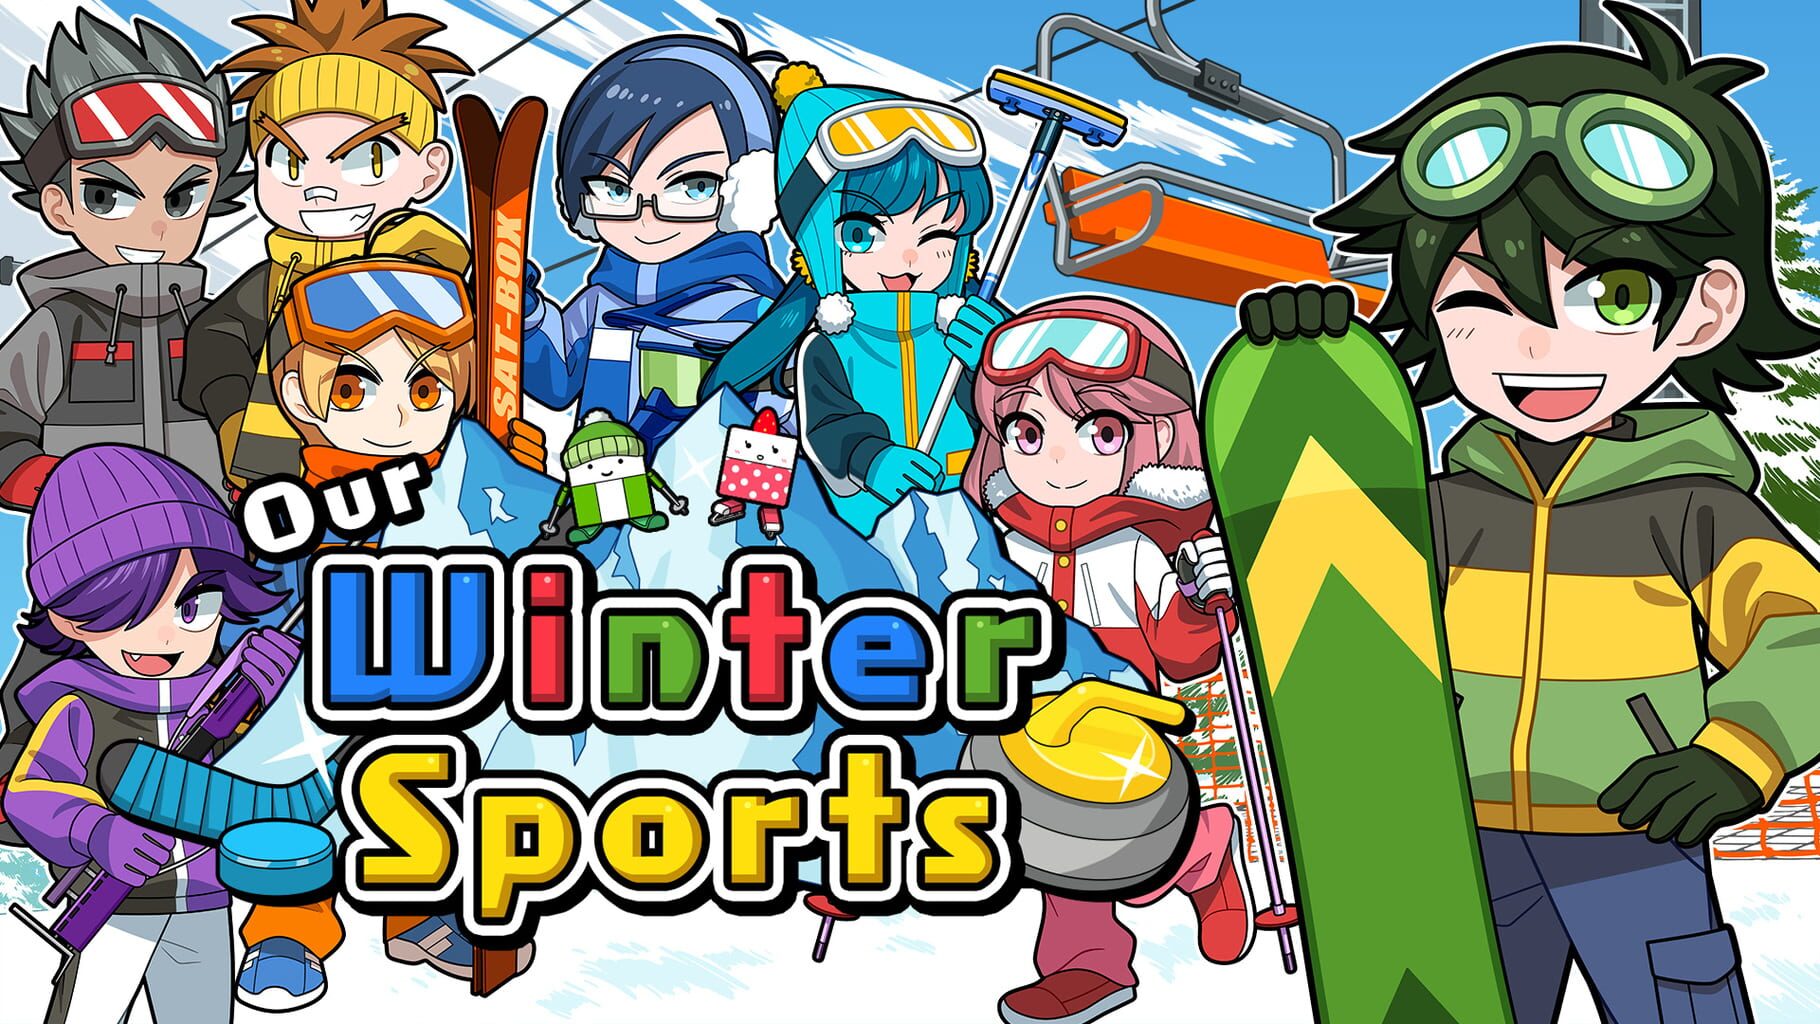 Our Winter Sports artwork